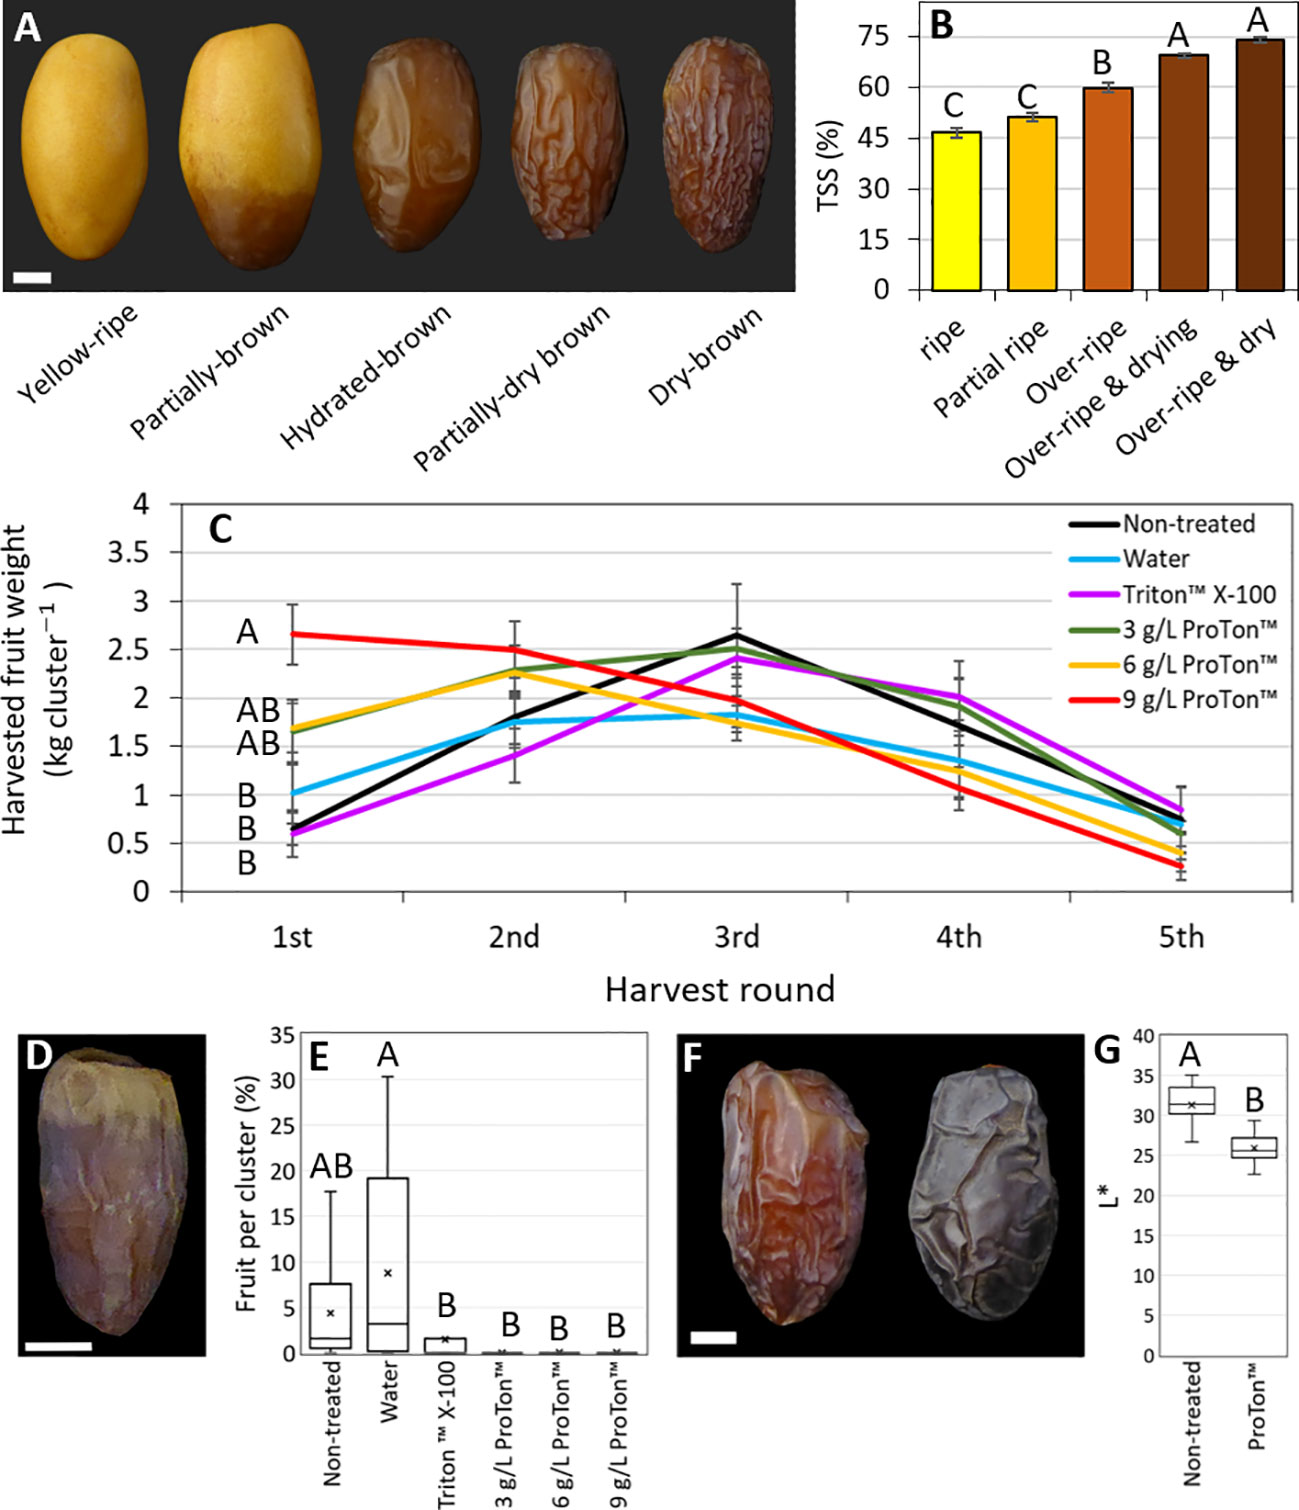 Frontiers Abscisic acid plays a key role in the regulation of date